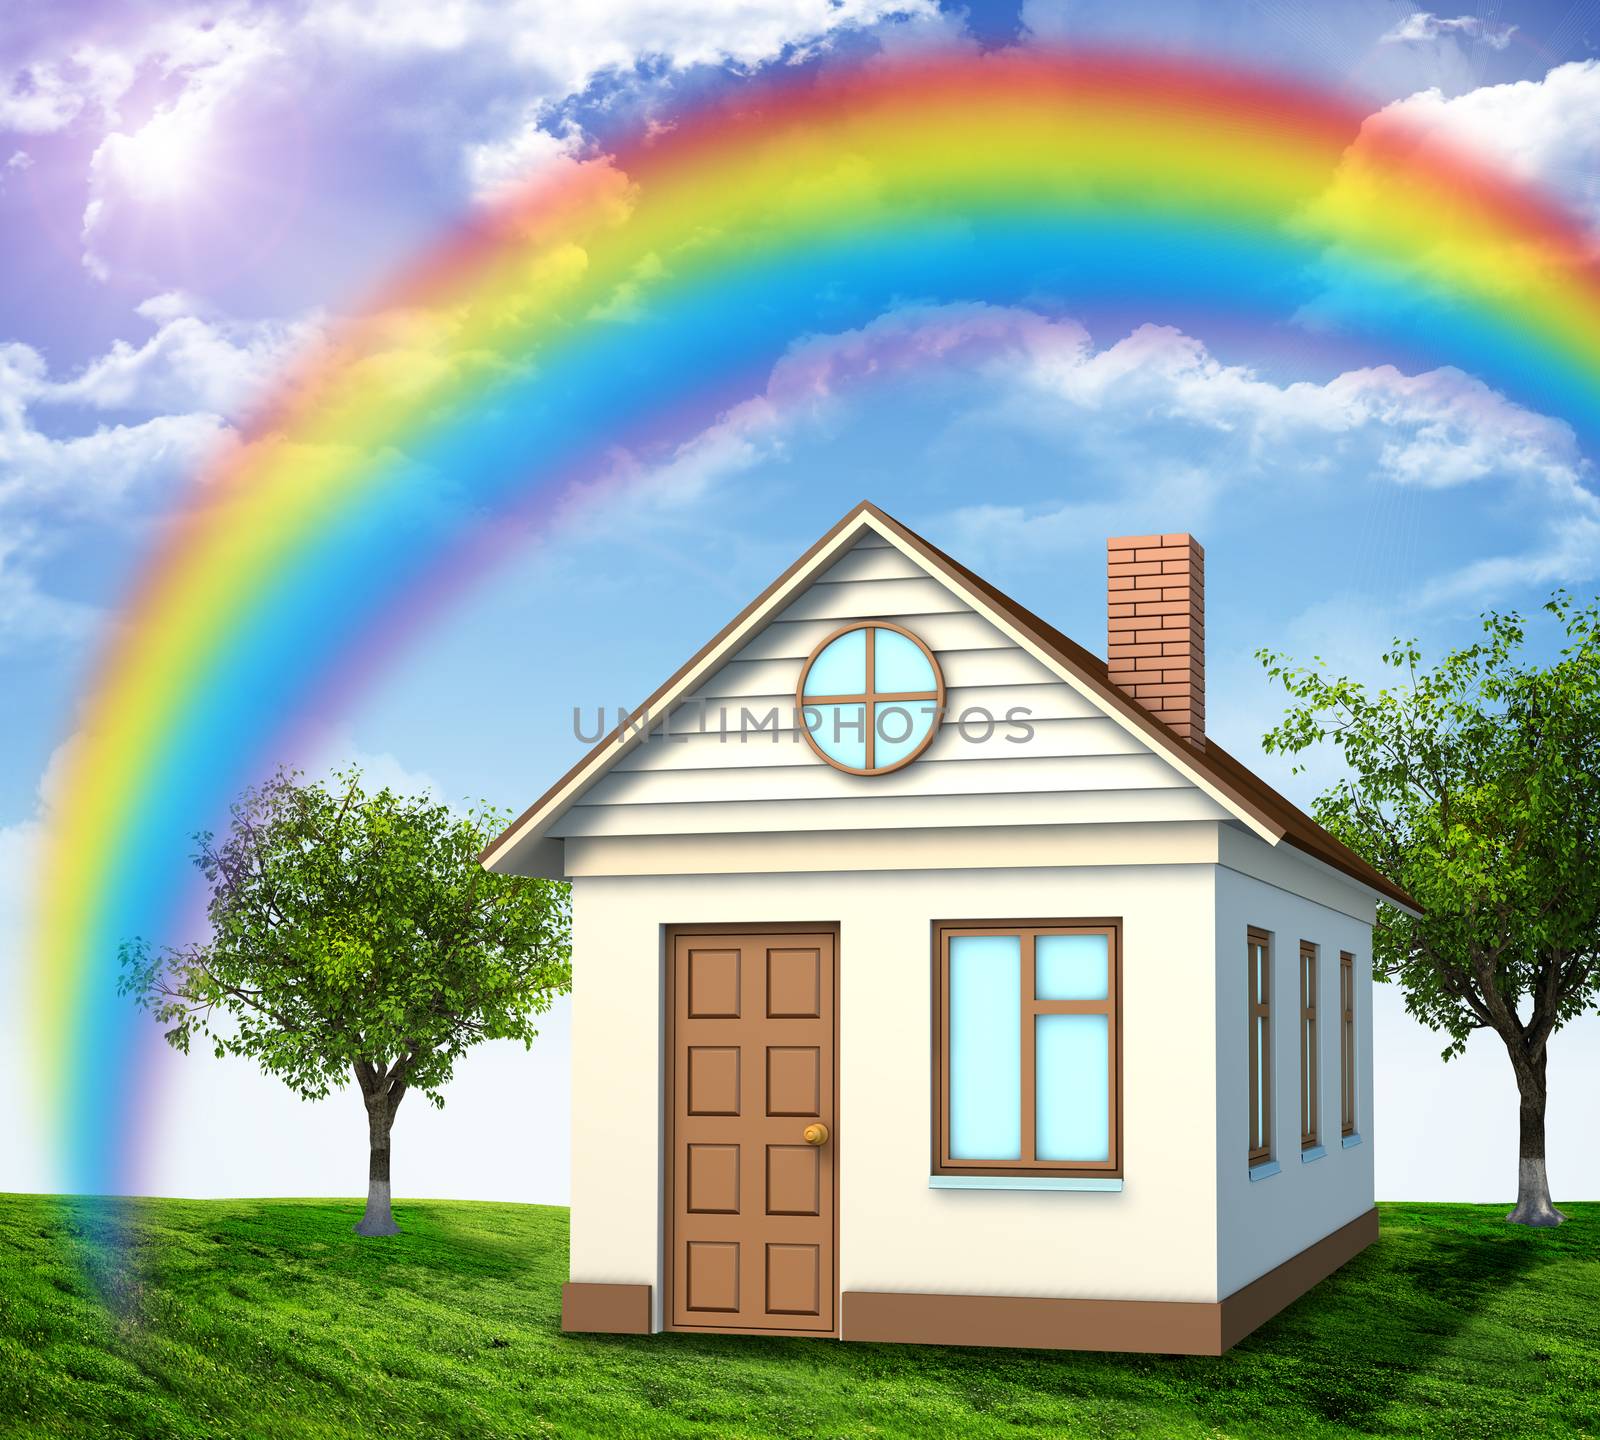 House on green field with rainbow and lawn